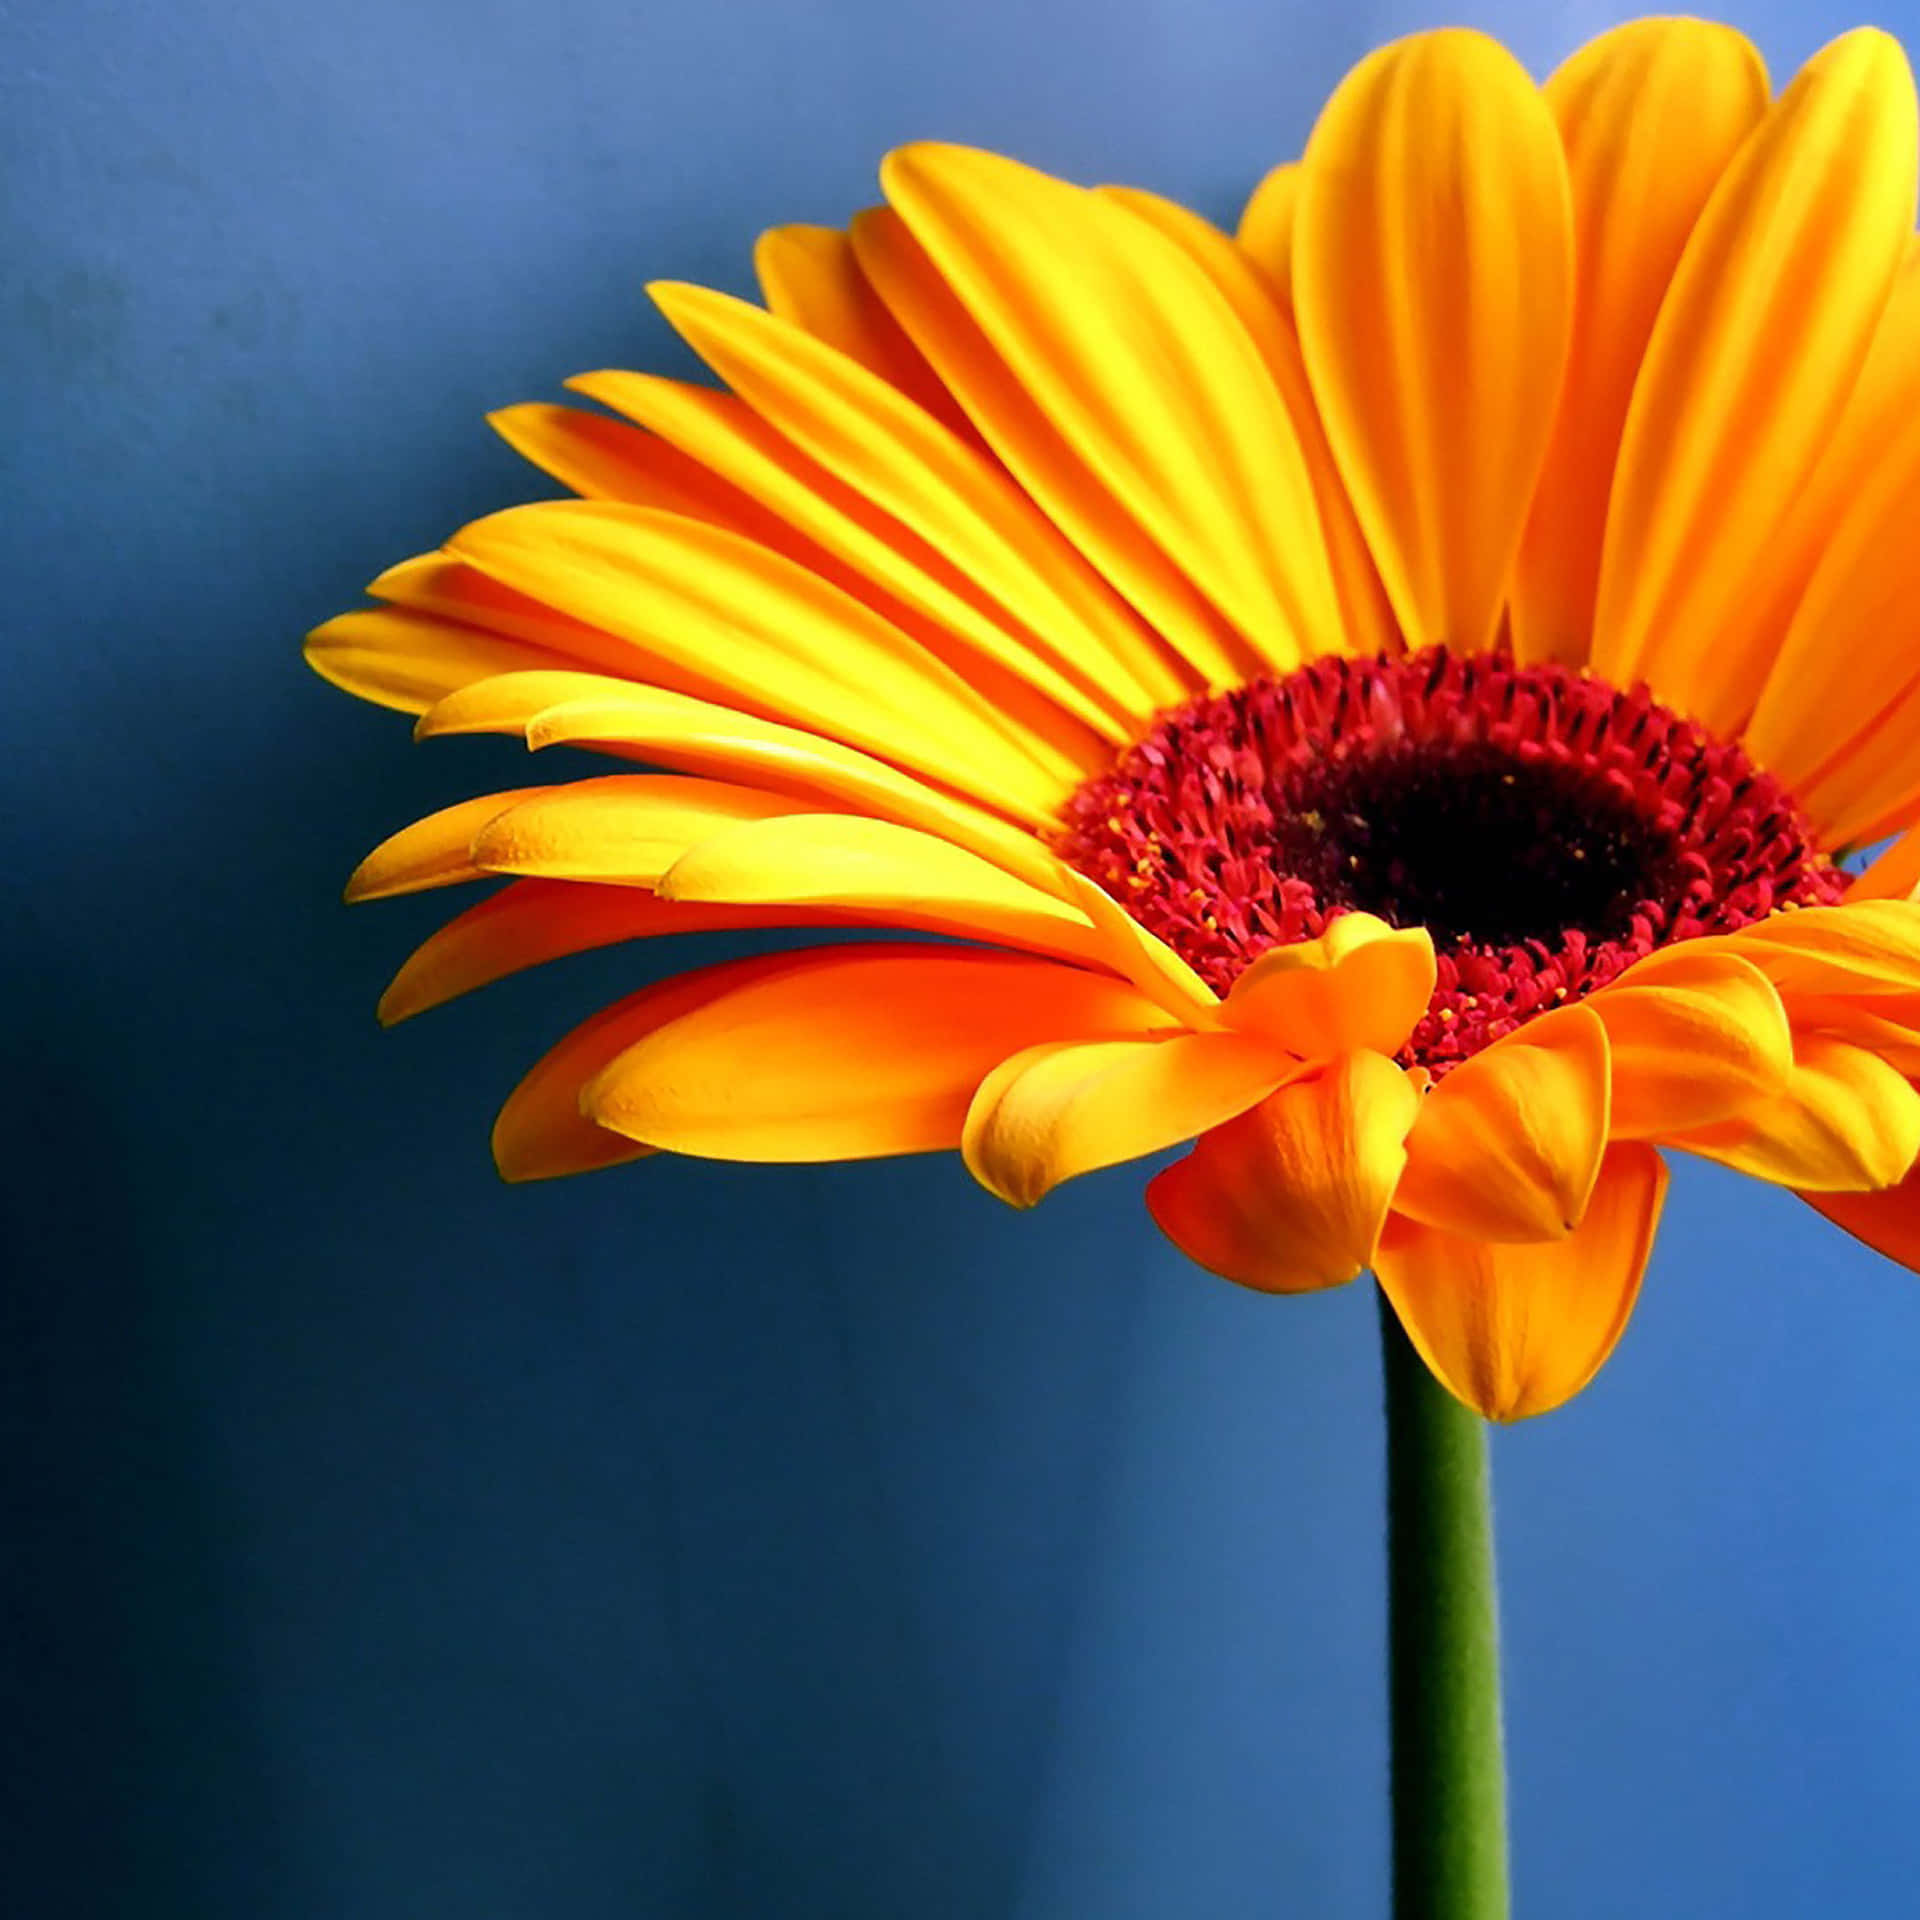 A Yellow Flower In A Vase Wallpaper